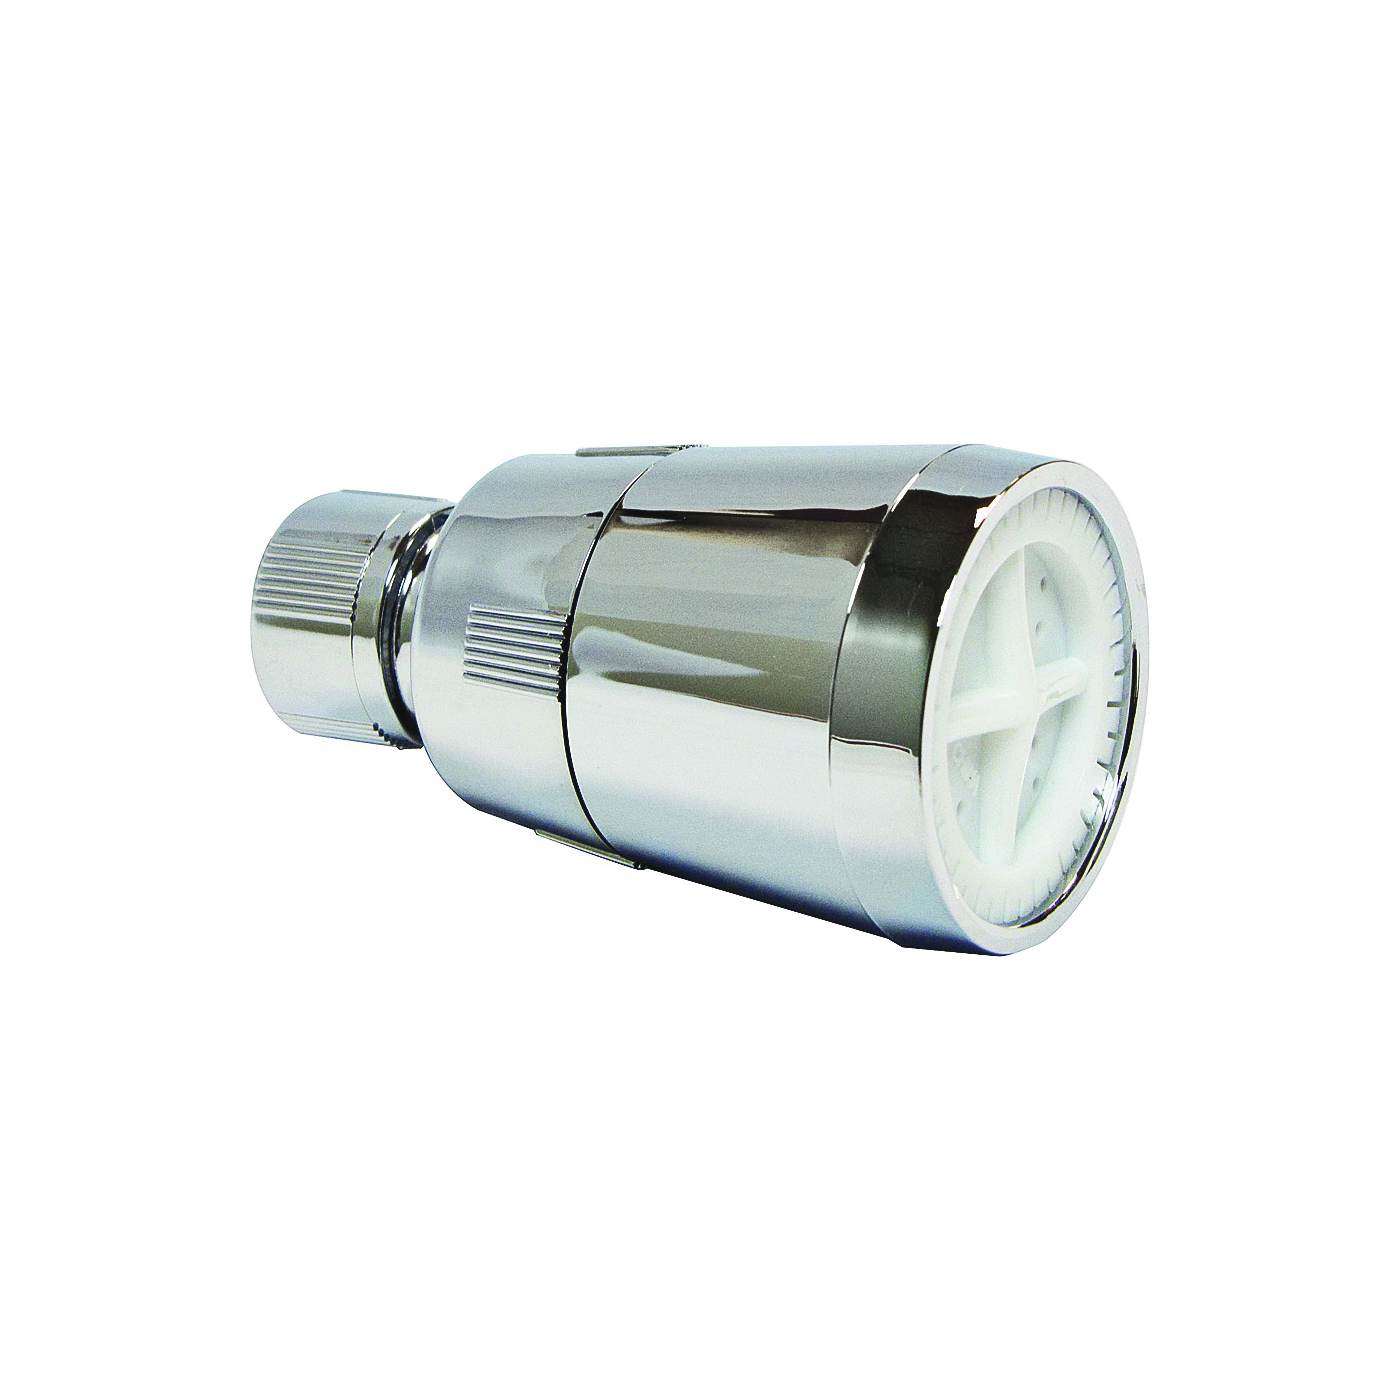 Economy Series PP825-3 Shower Head, 2.5 gpm, 1/2 in Connection, Plastic, Chrome